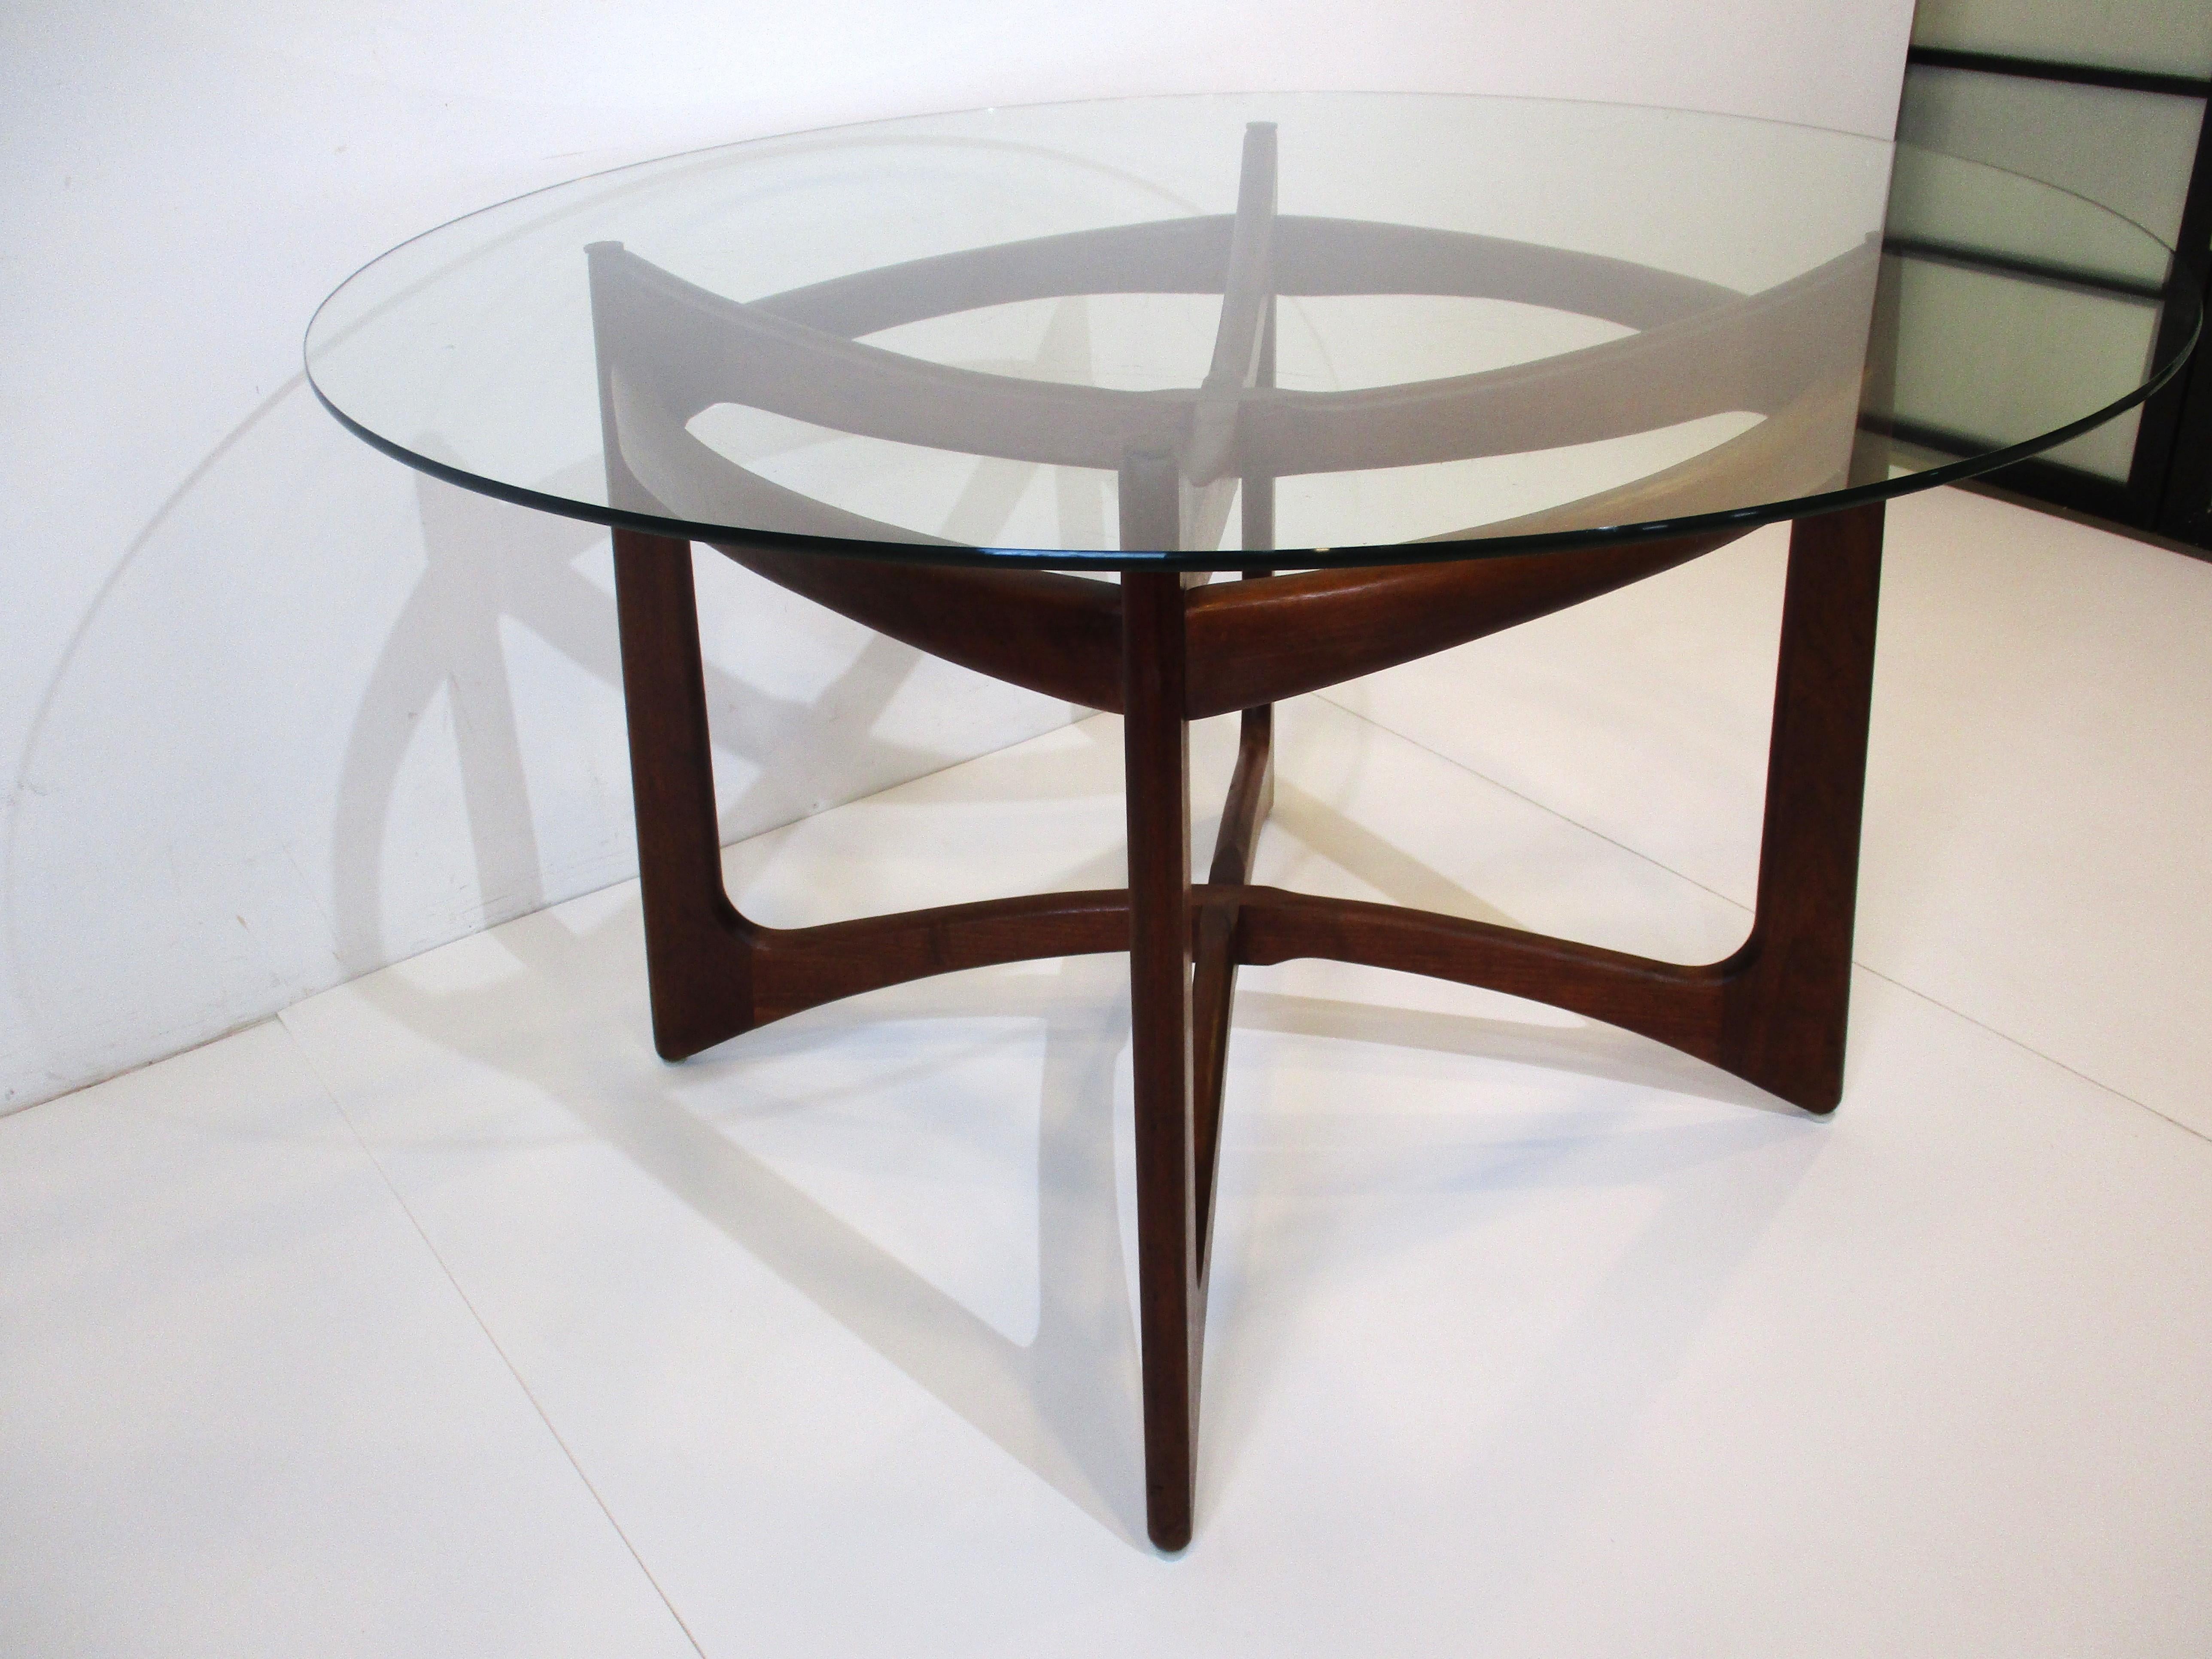 20th Century Midcentury Adrian Pearsall Sculptural Walnut Dining Table 